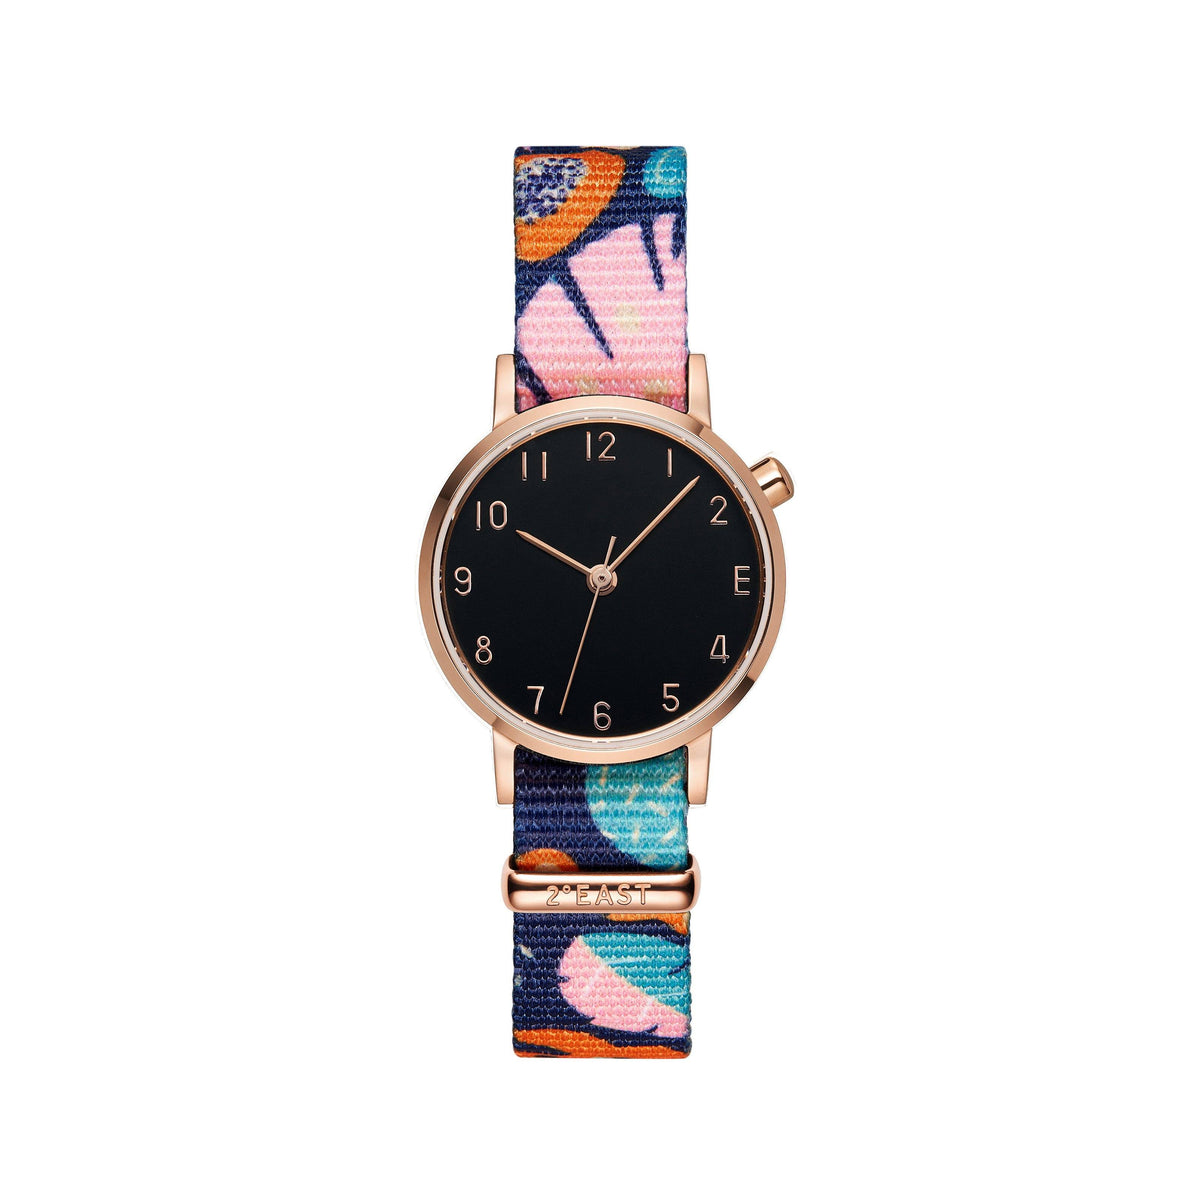 The Black and Rose Gold Watch -  Tropical (Kids)